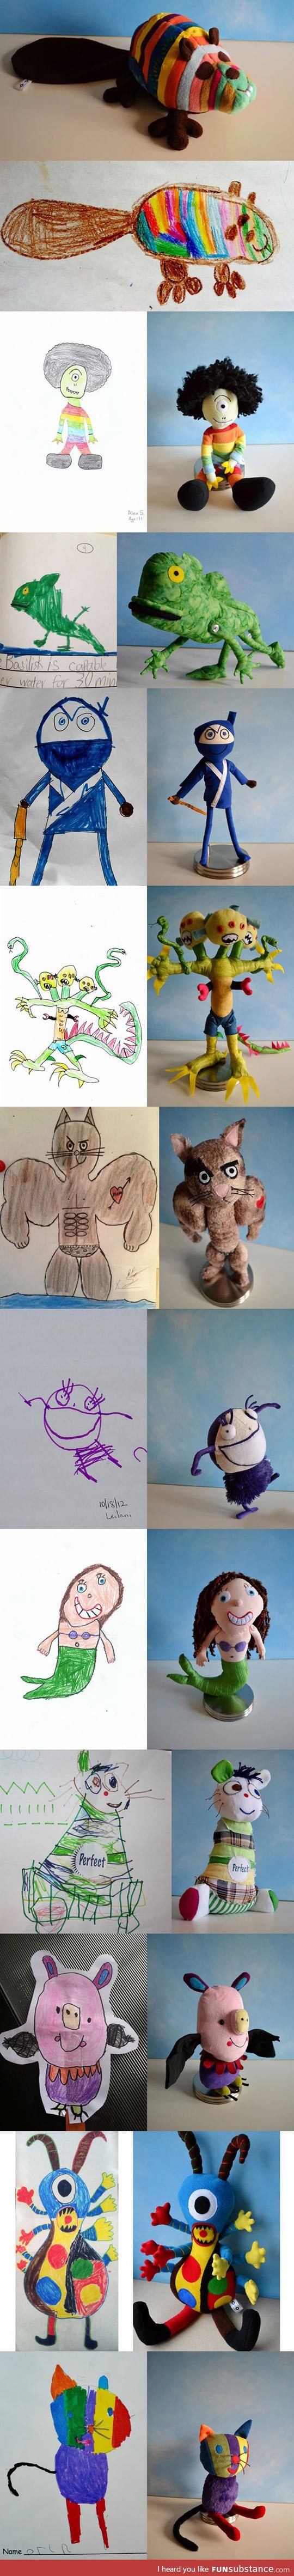 A talented artist turns kids drawings into plush toys